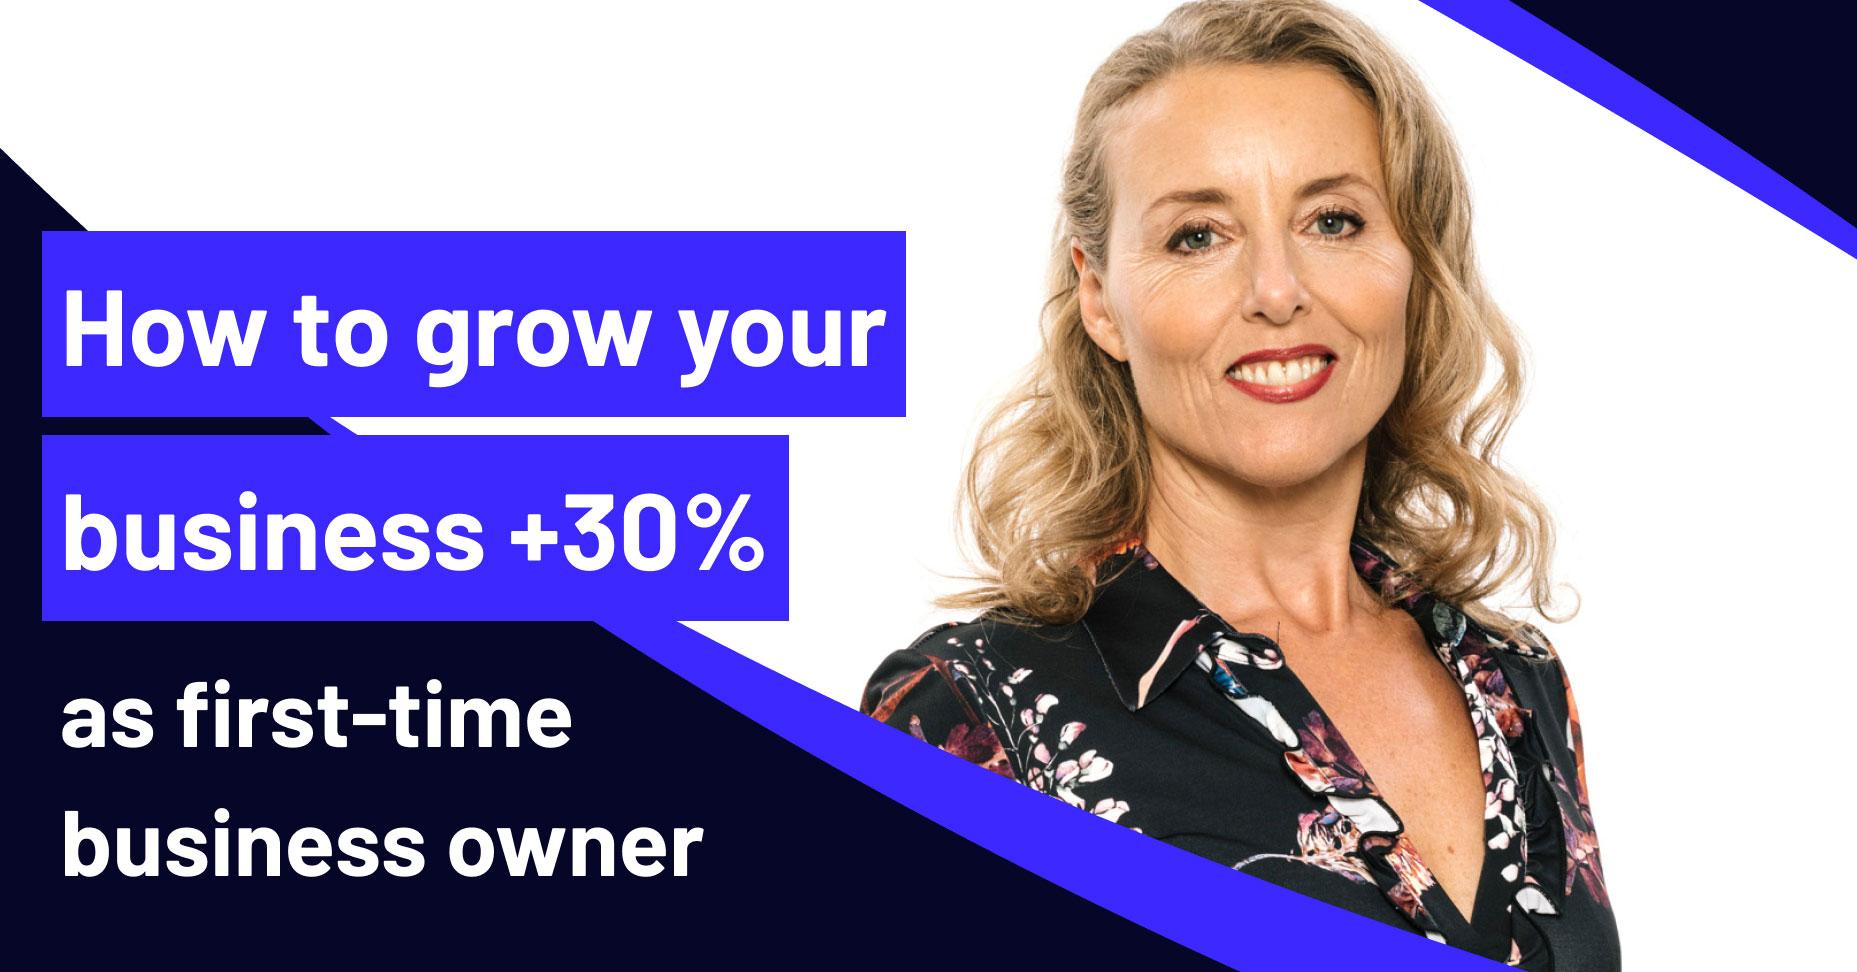 How to grow your business +30% as first-time business owner